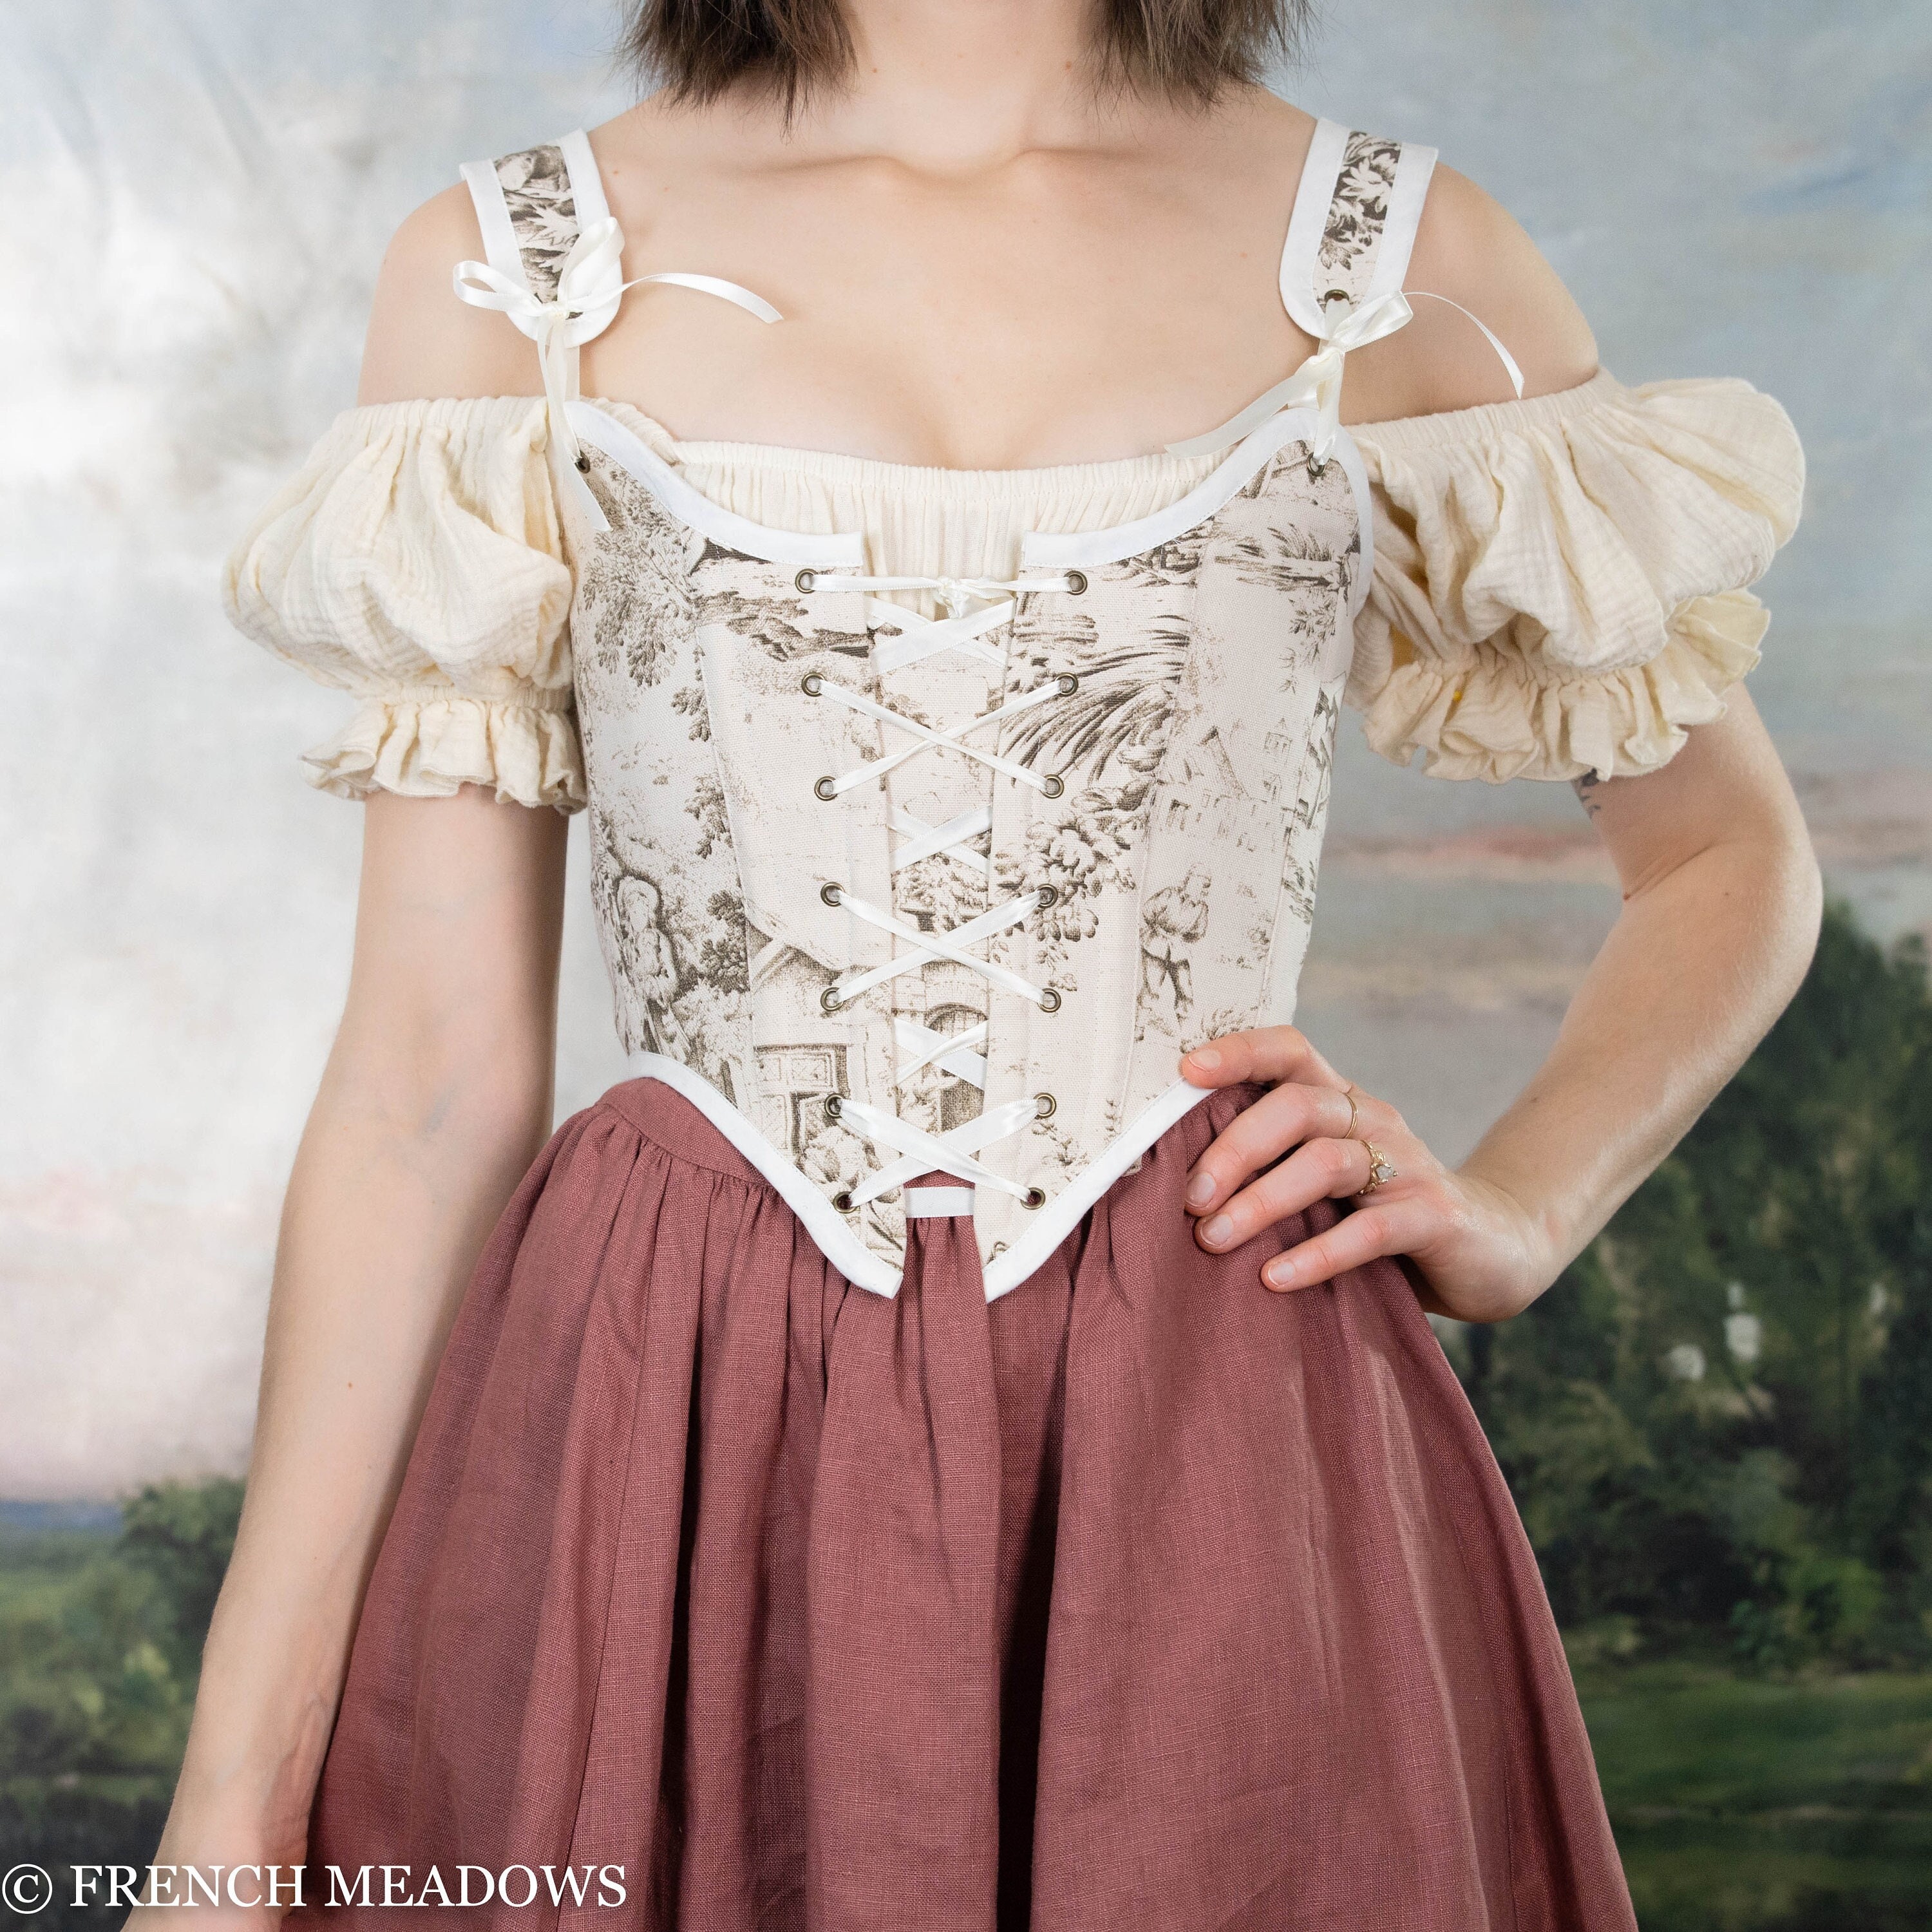 Floral Tapestry Corset  Floral Corset Renaissance Bodice – French